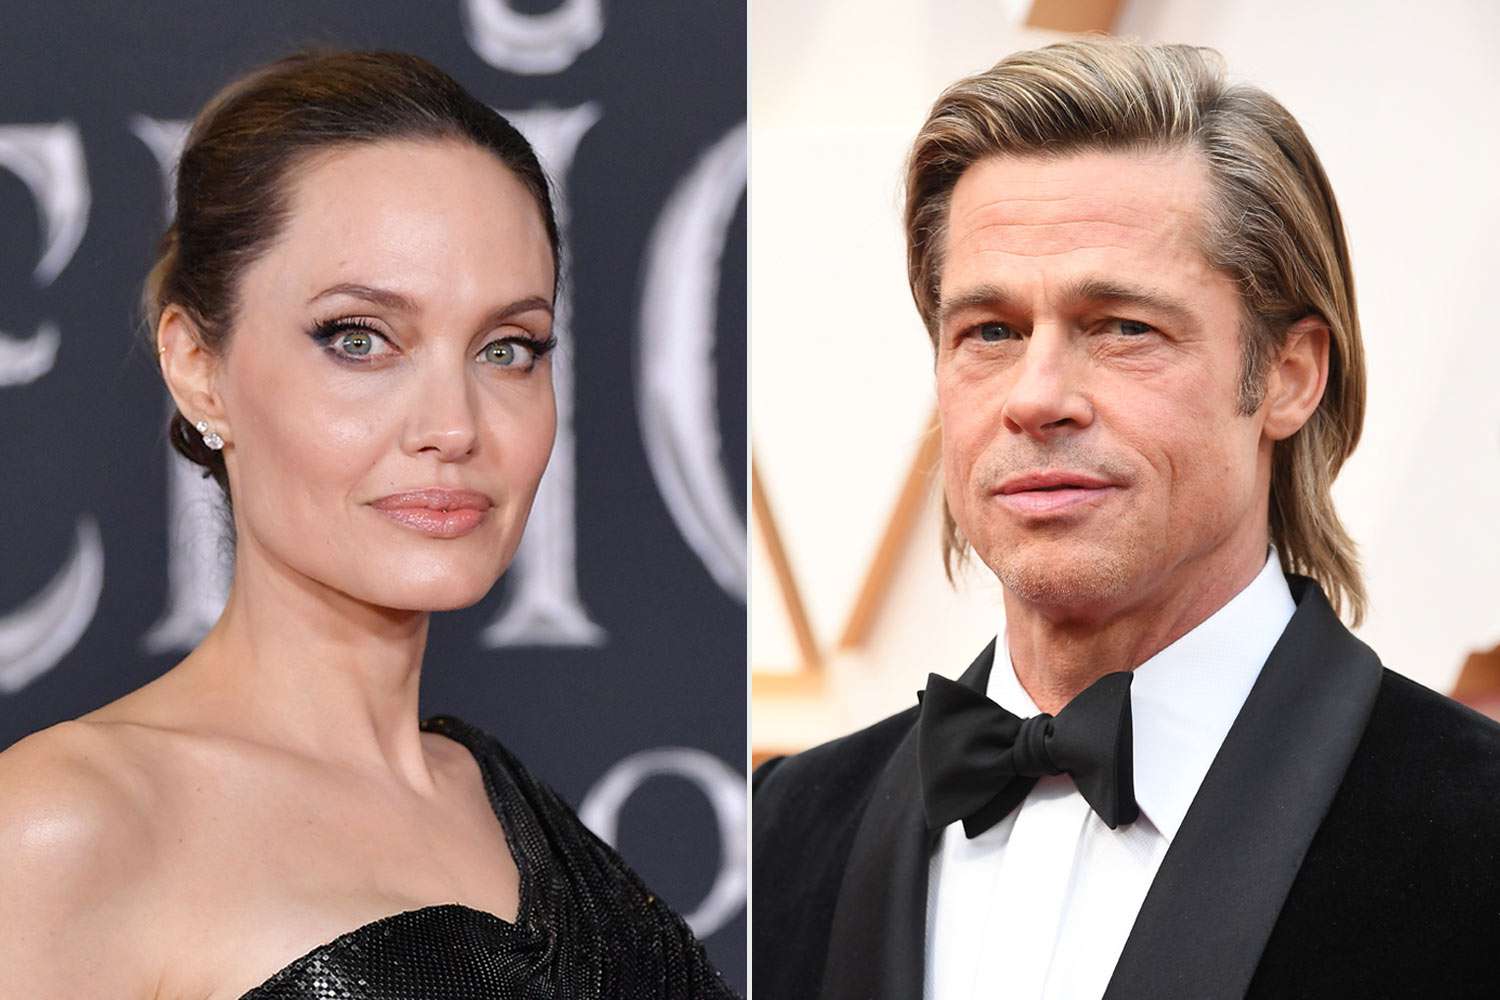 Angelina Jolie Source Claims Brad Pitt Is Using Latest in Winery Legal Battle to 'Punish Her for Leaving'